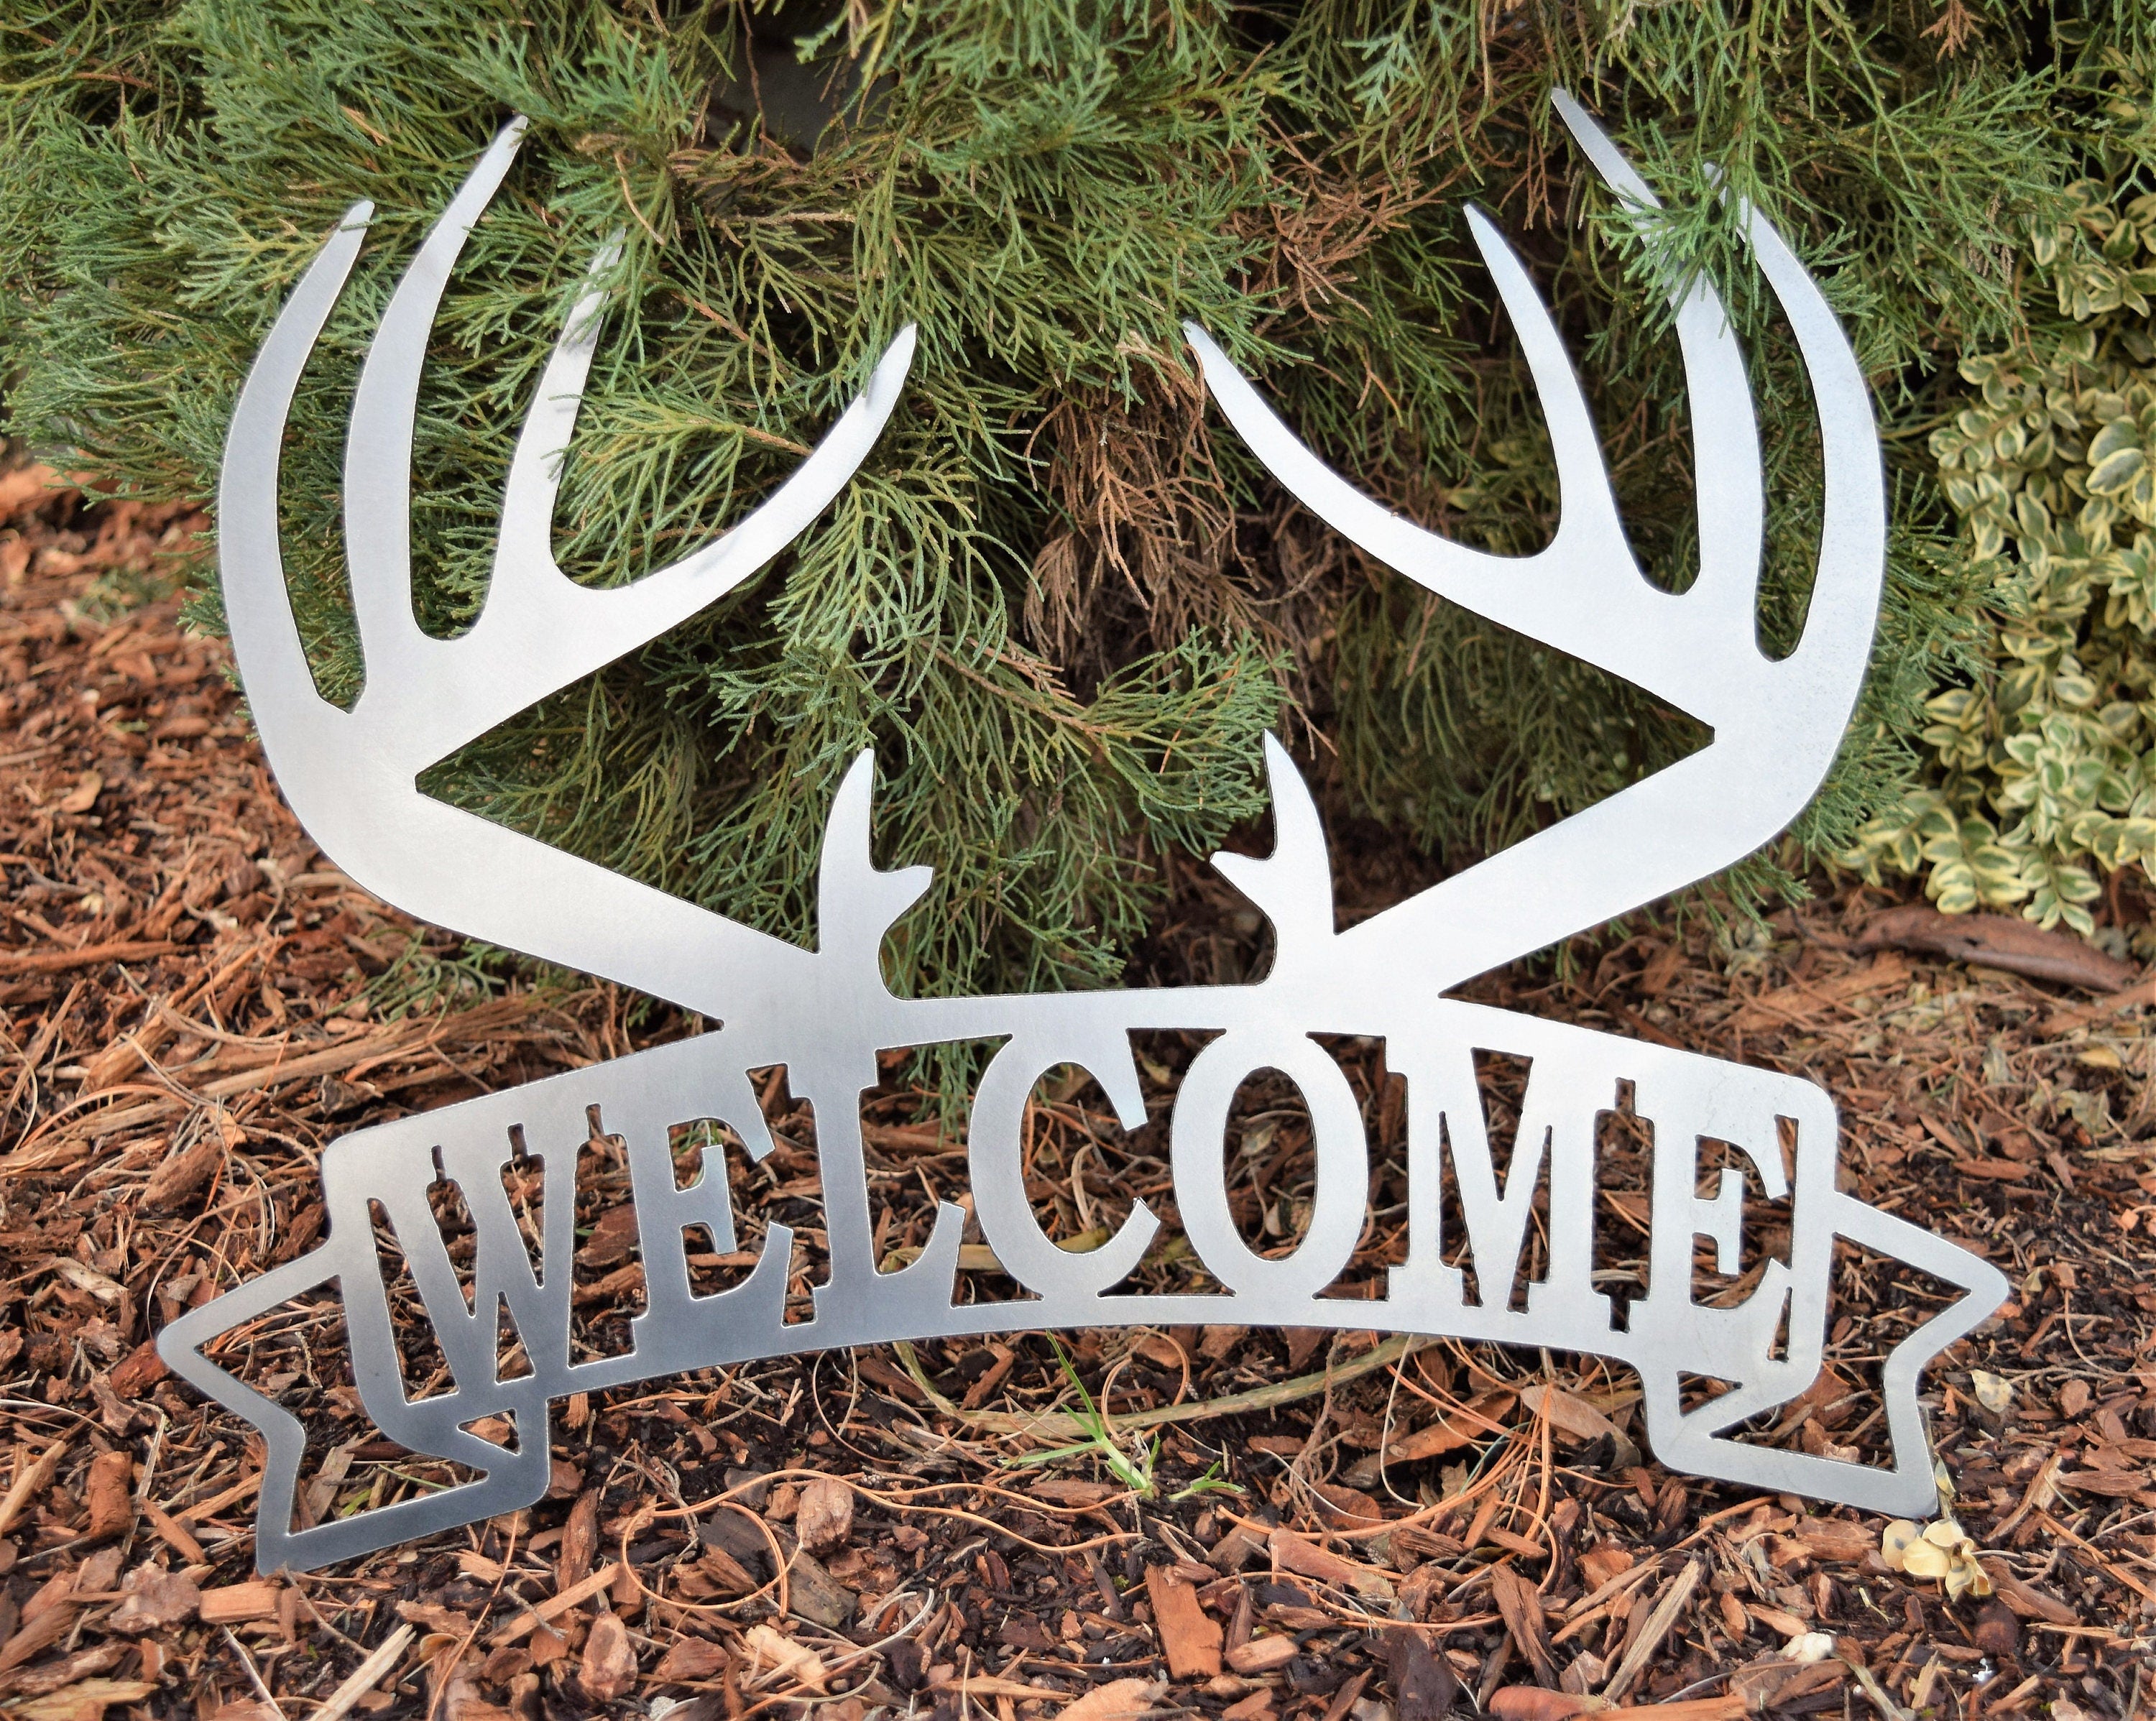 Antler Welcome Sign